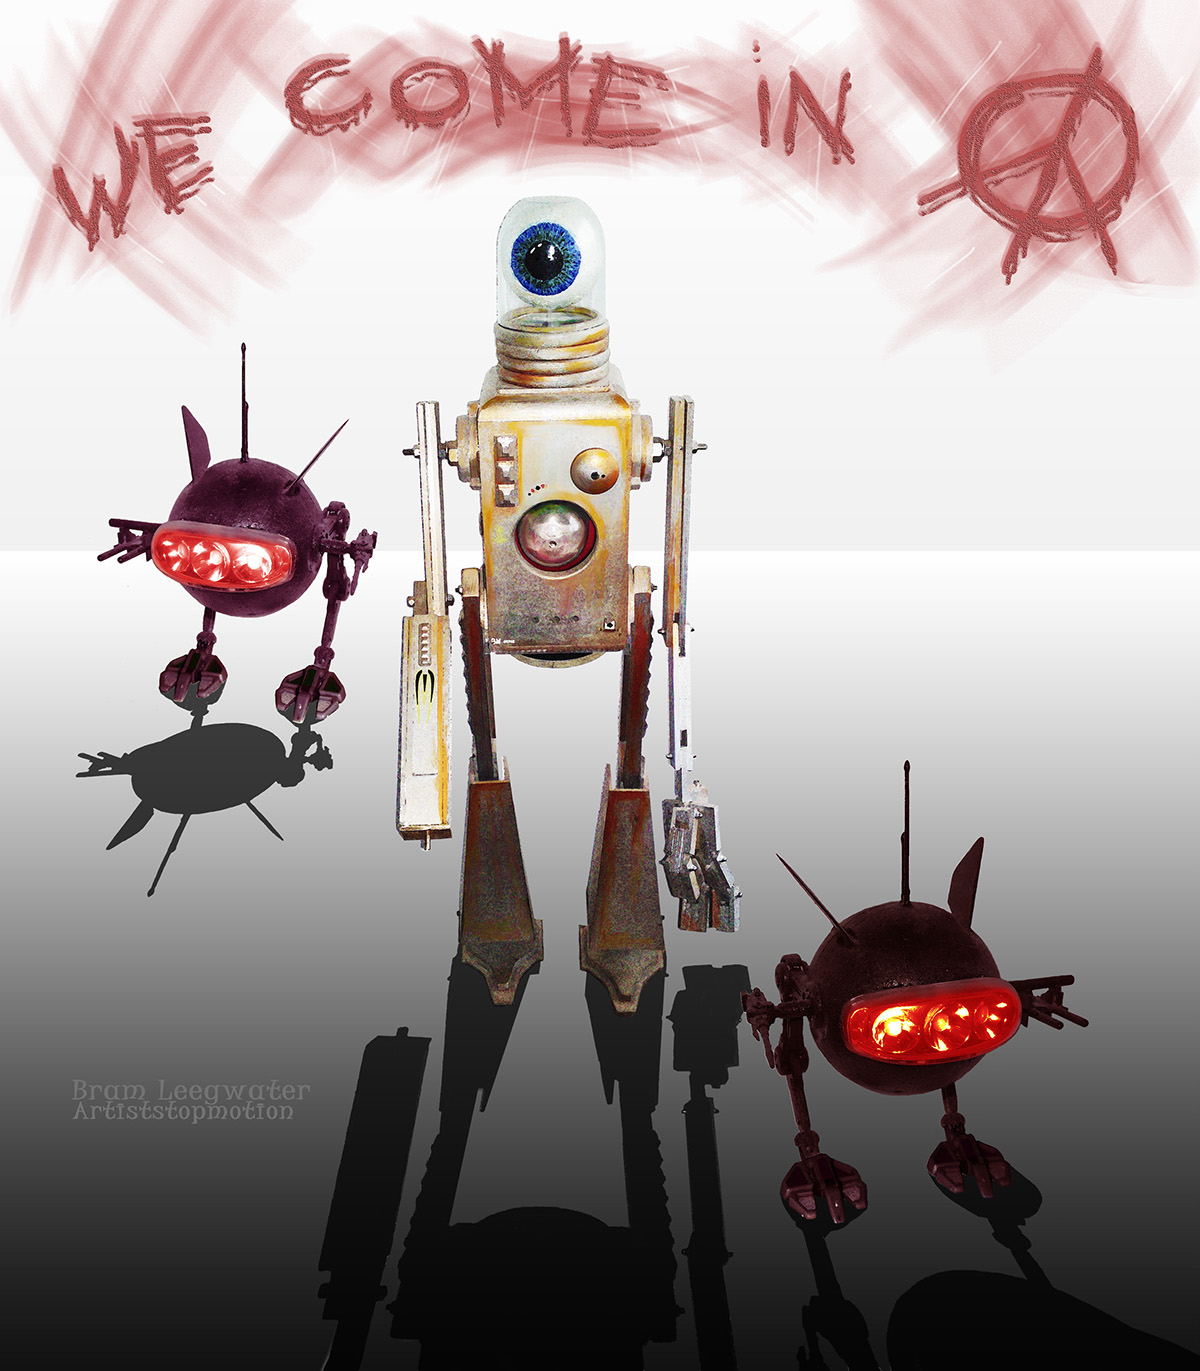 robots we come in peace android droids digital robots new star wars concept art bram leegwater digital painting robot art colors fantasy sci-fi Sci Fi